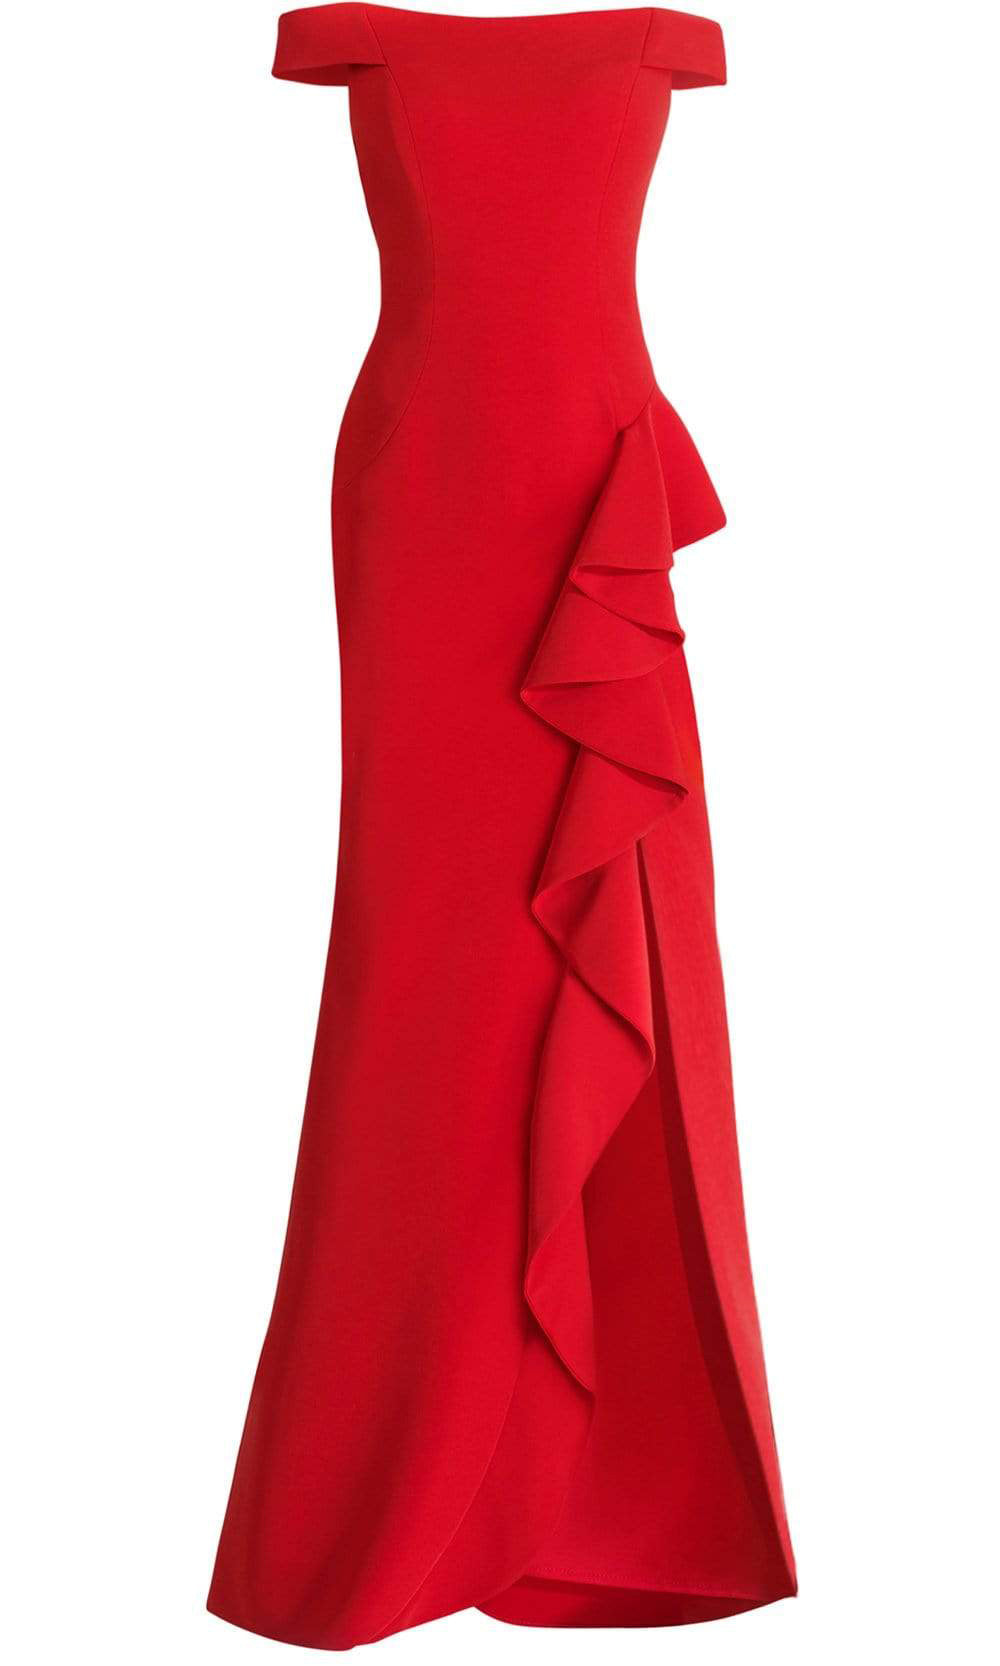 Janique - Sheath Dress with Ruffle and Side Slit C1870SC In Red